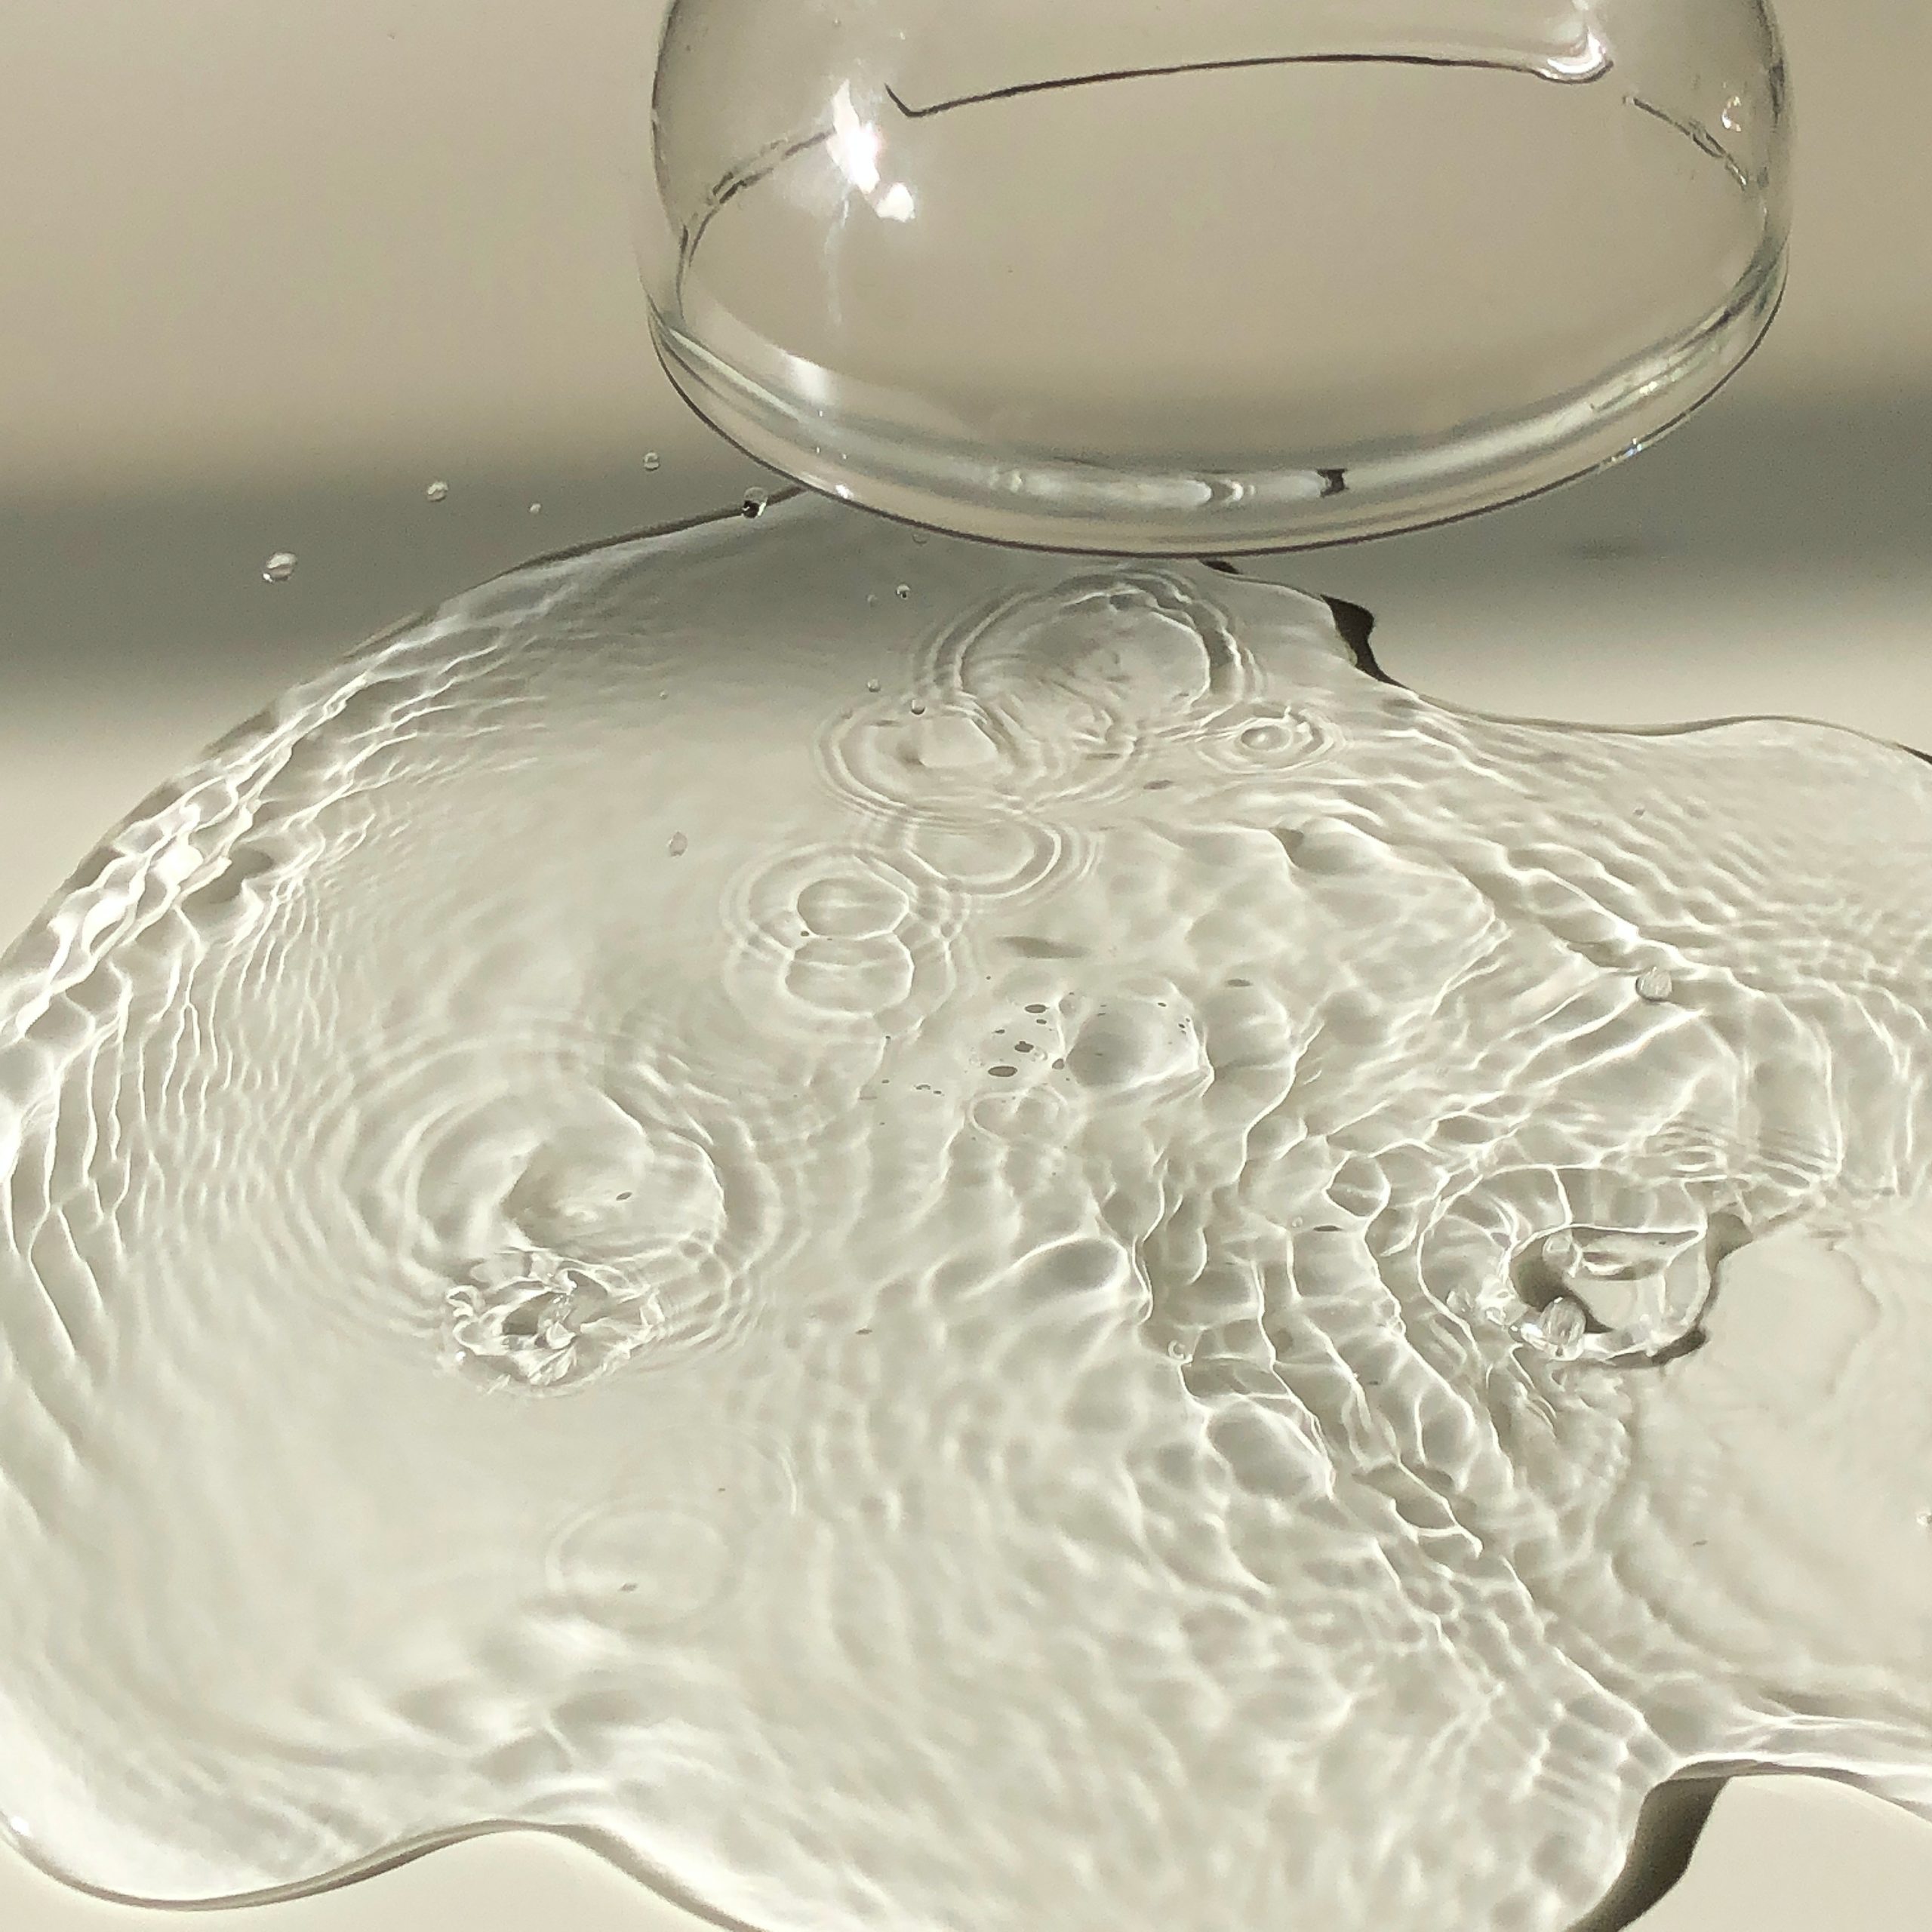 A 3d model of a glass of water on a table.